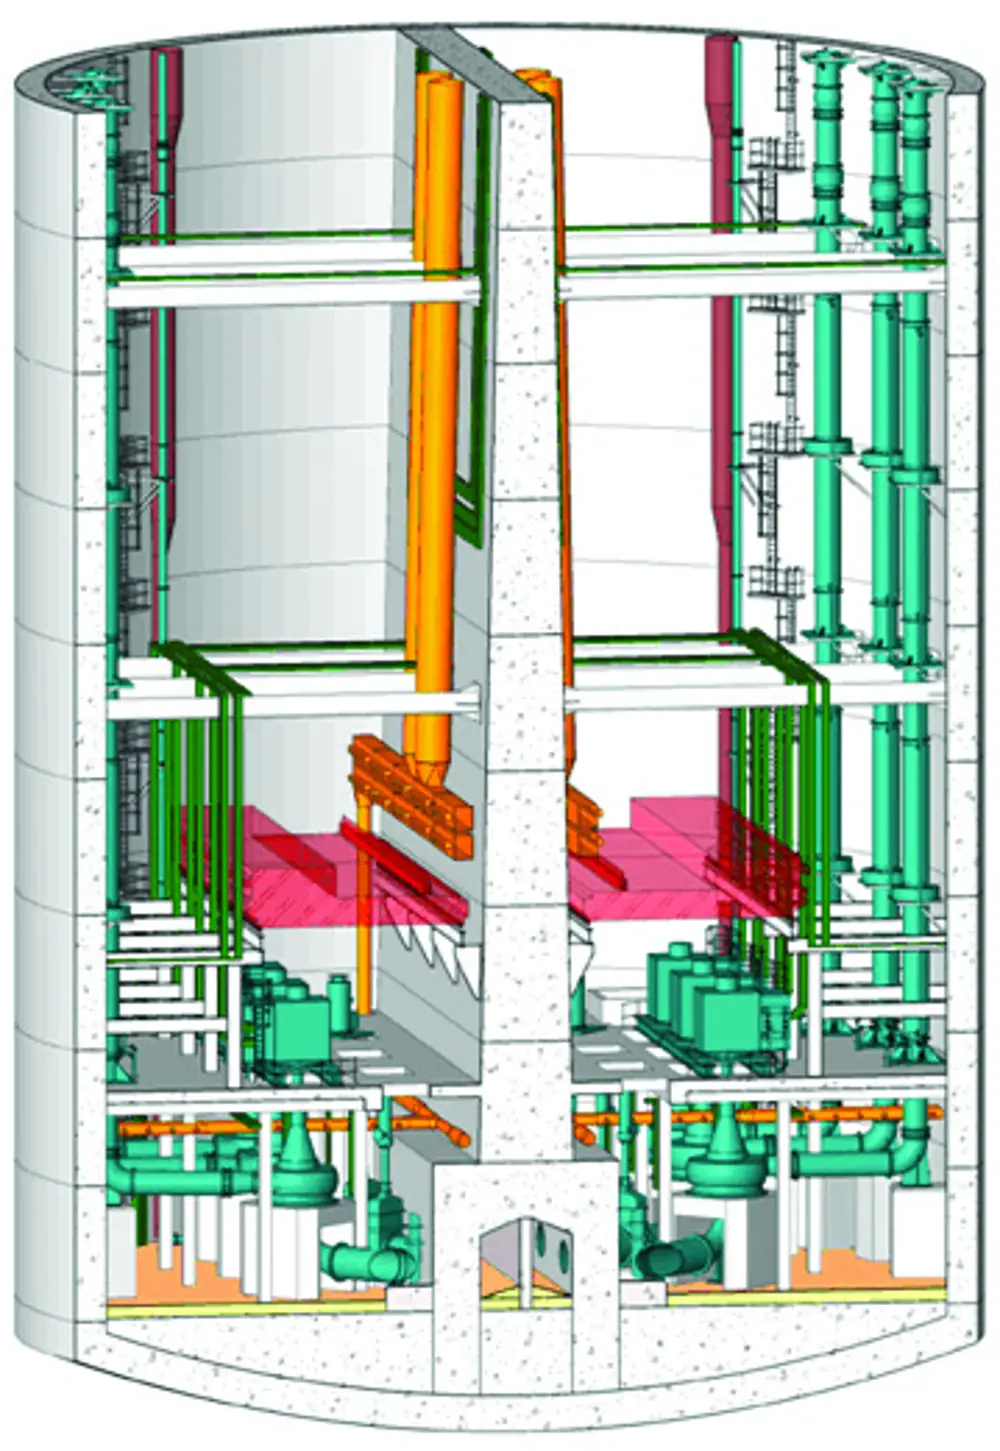 A diagram of the inside of a pump at the Thames Tideway pumping station.